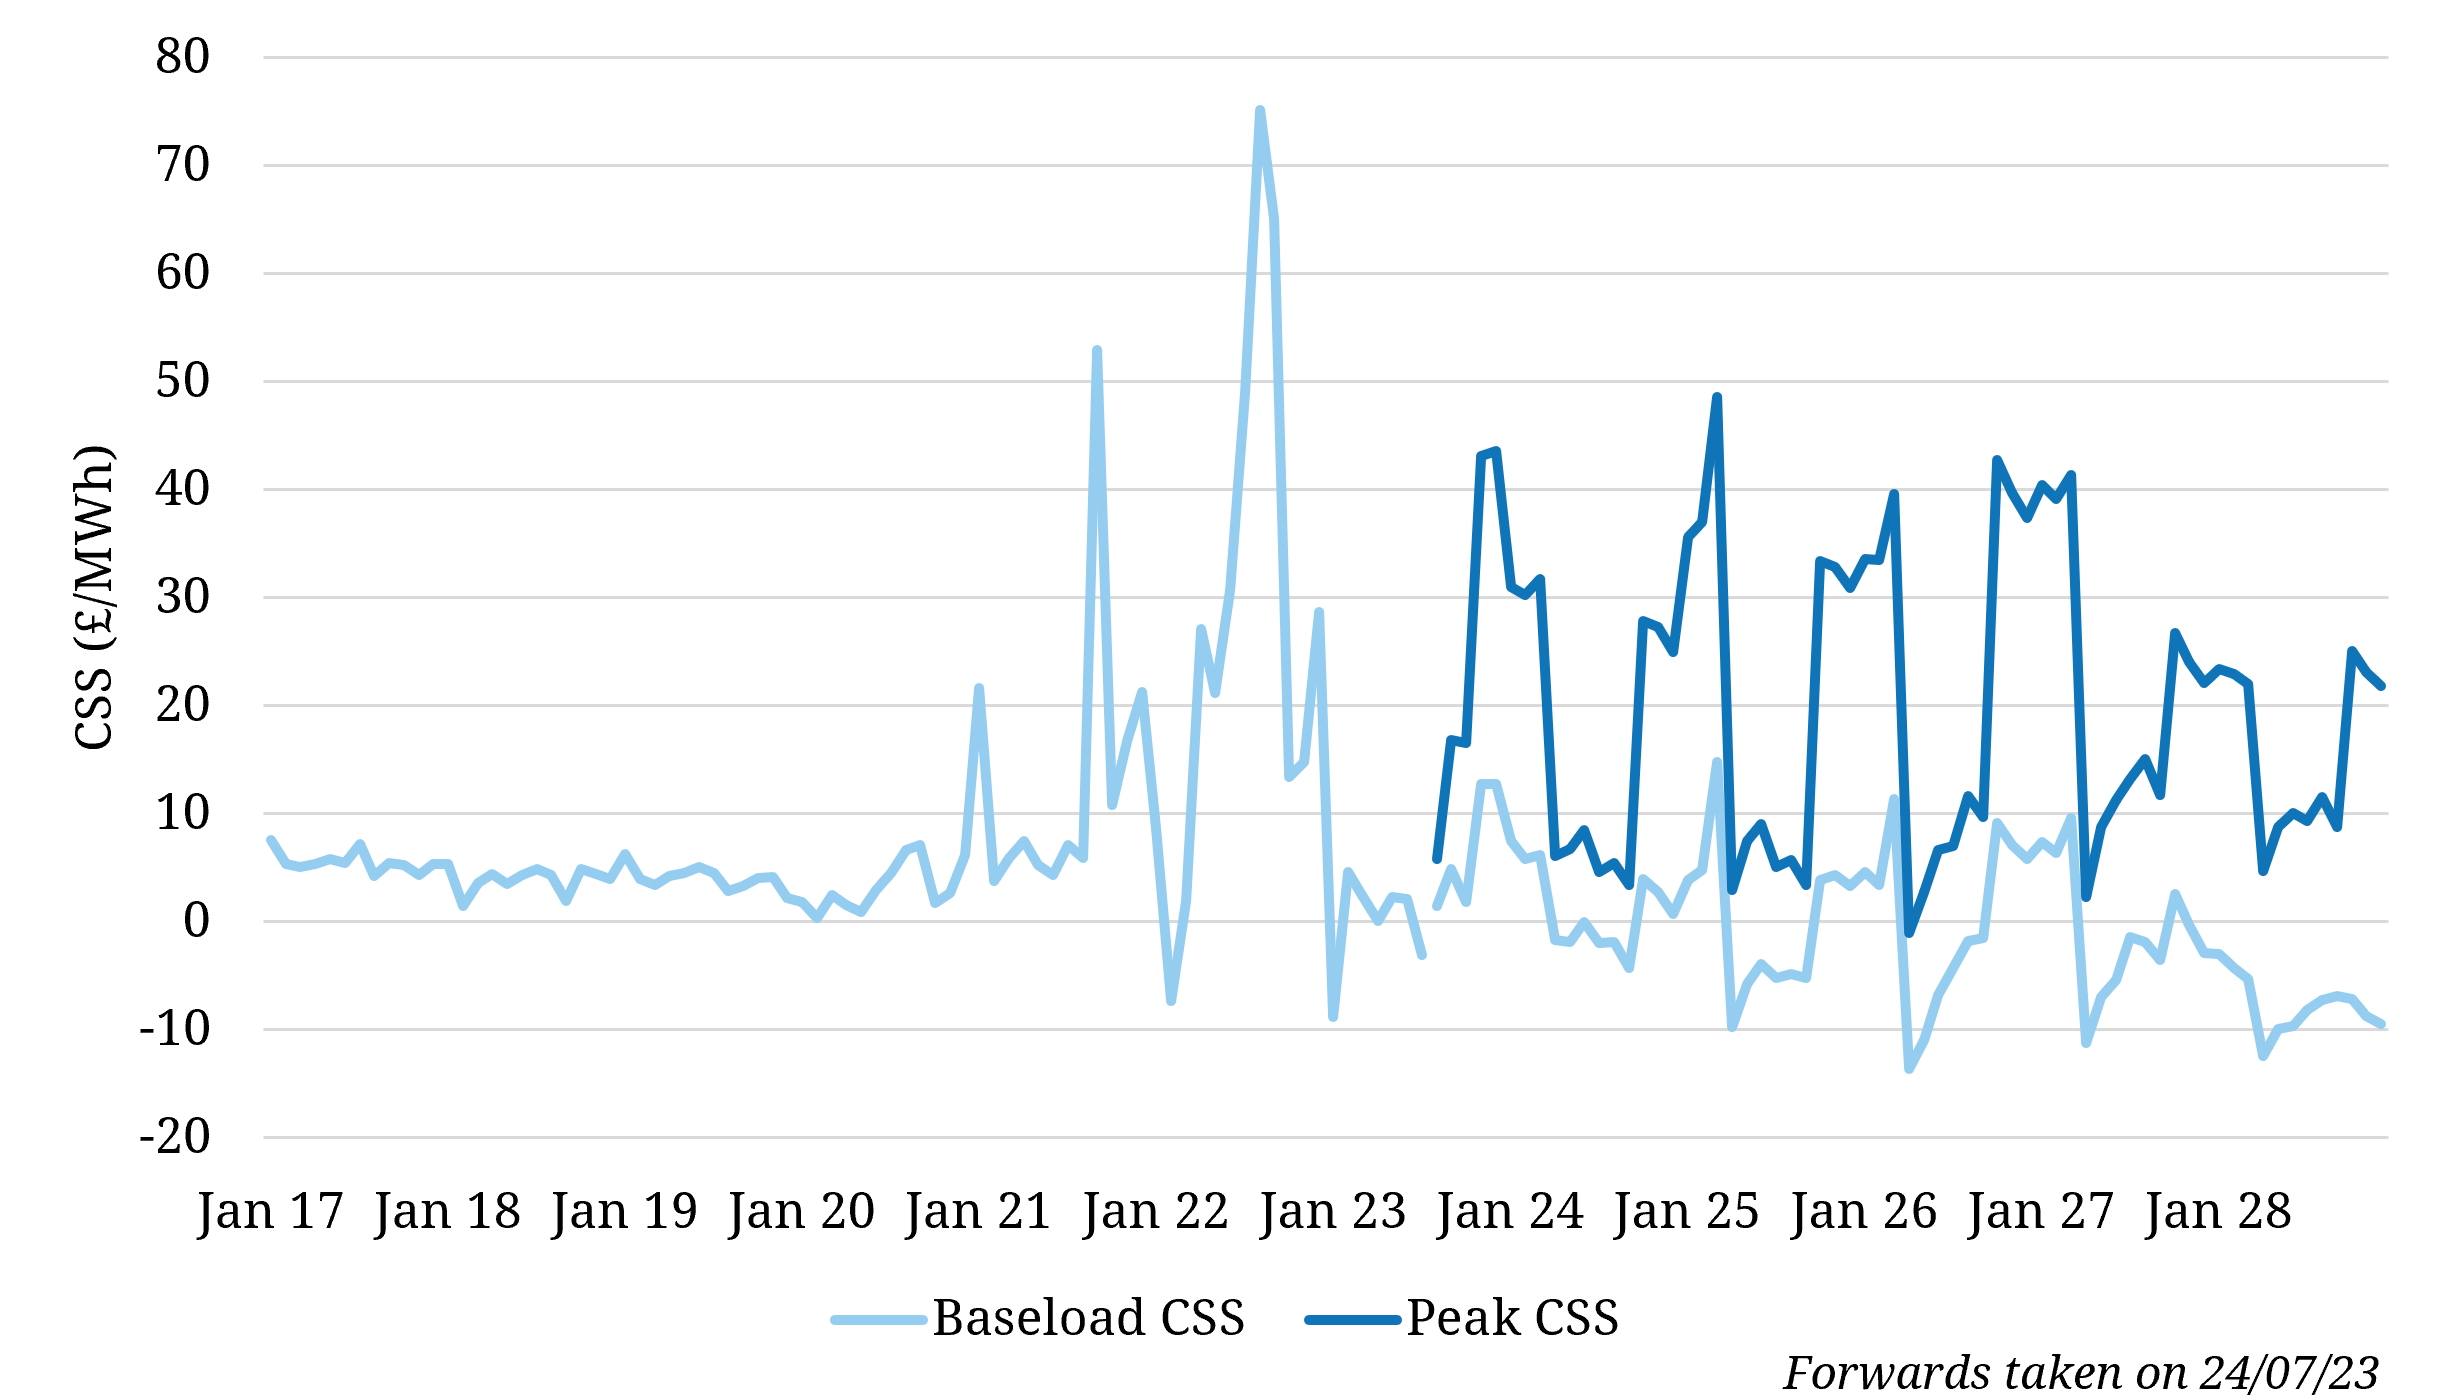 Forward peak CSS shows continued requirement for CCGT